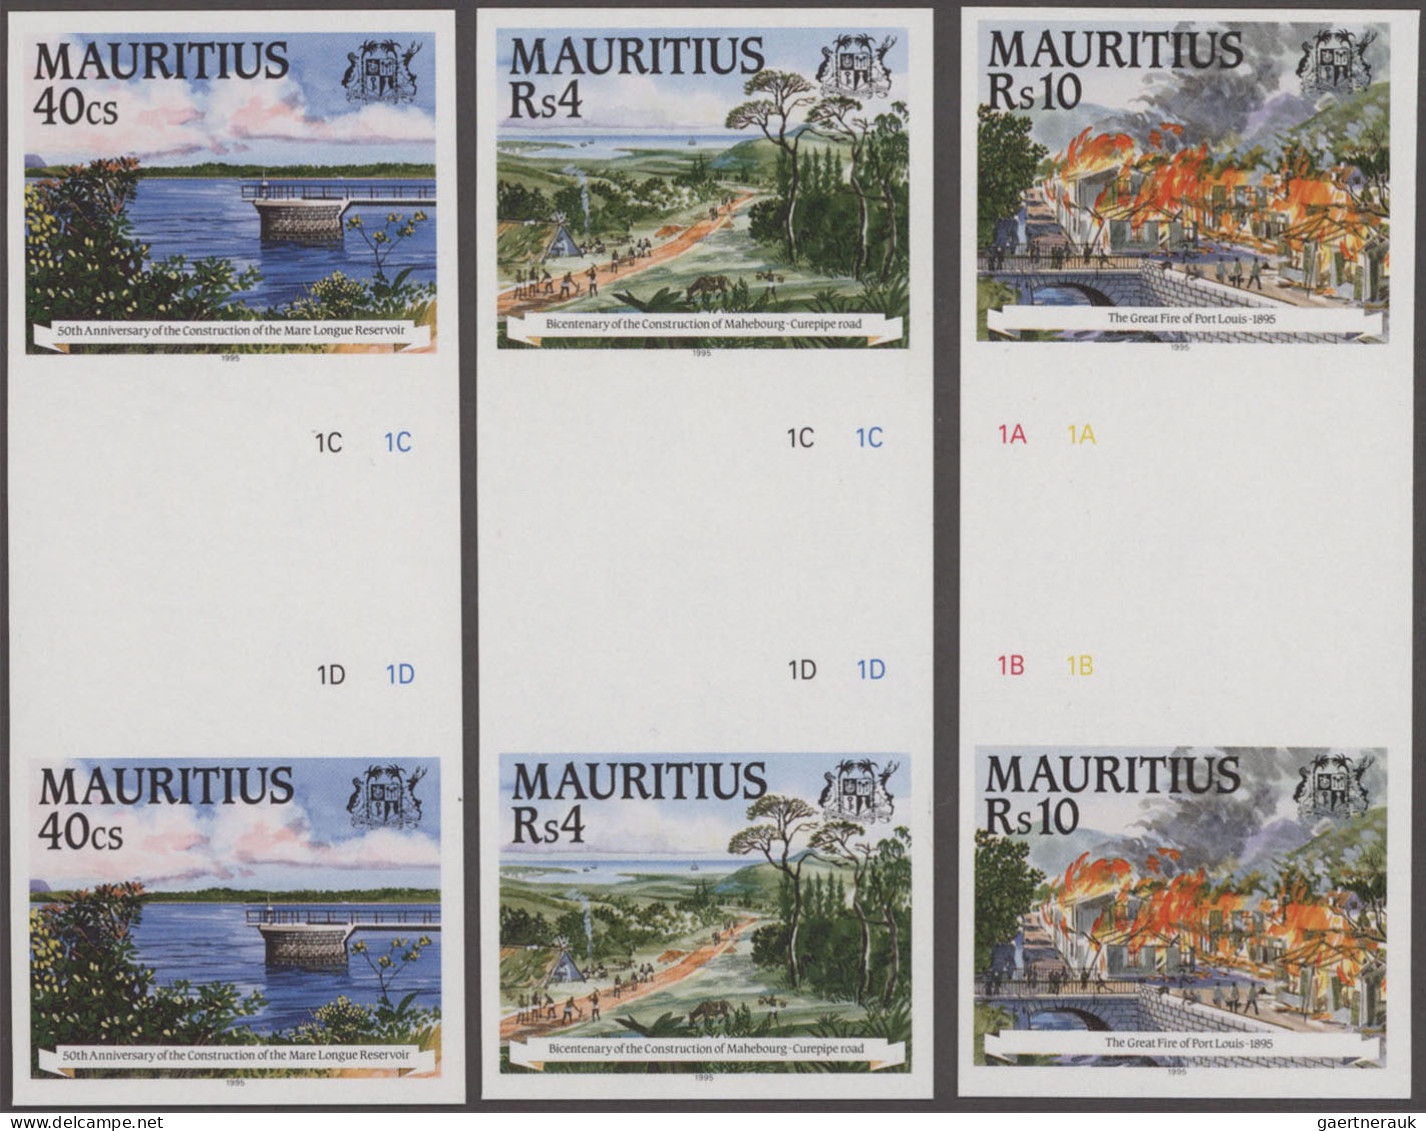 Mauritius: 1989/2016. Collection containing 23399 IMPERFORATE stamps and 22 IMPE